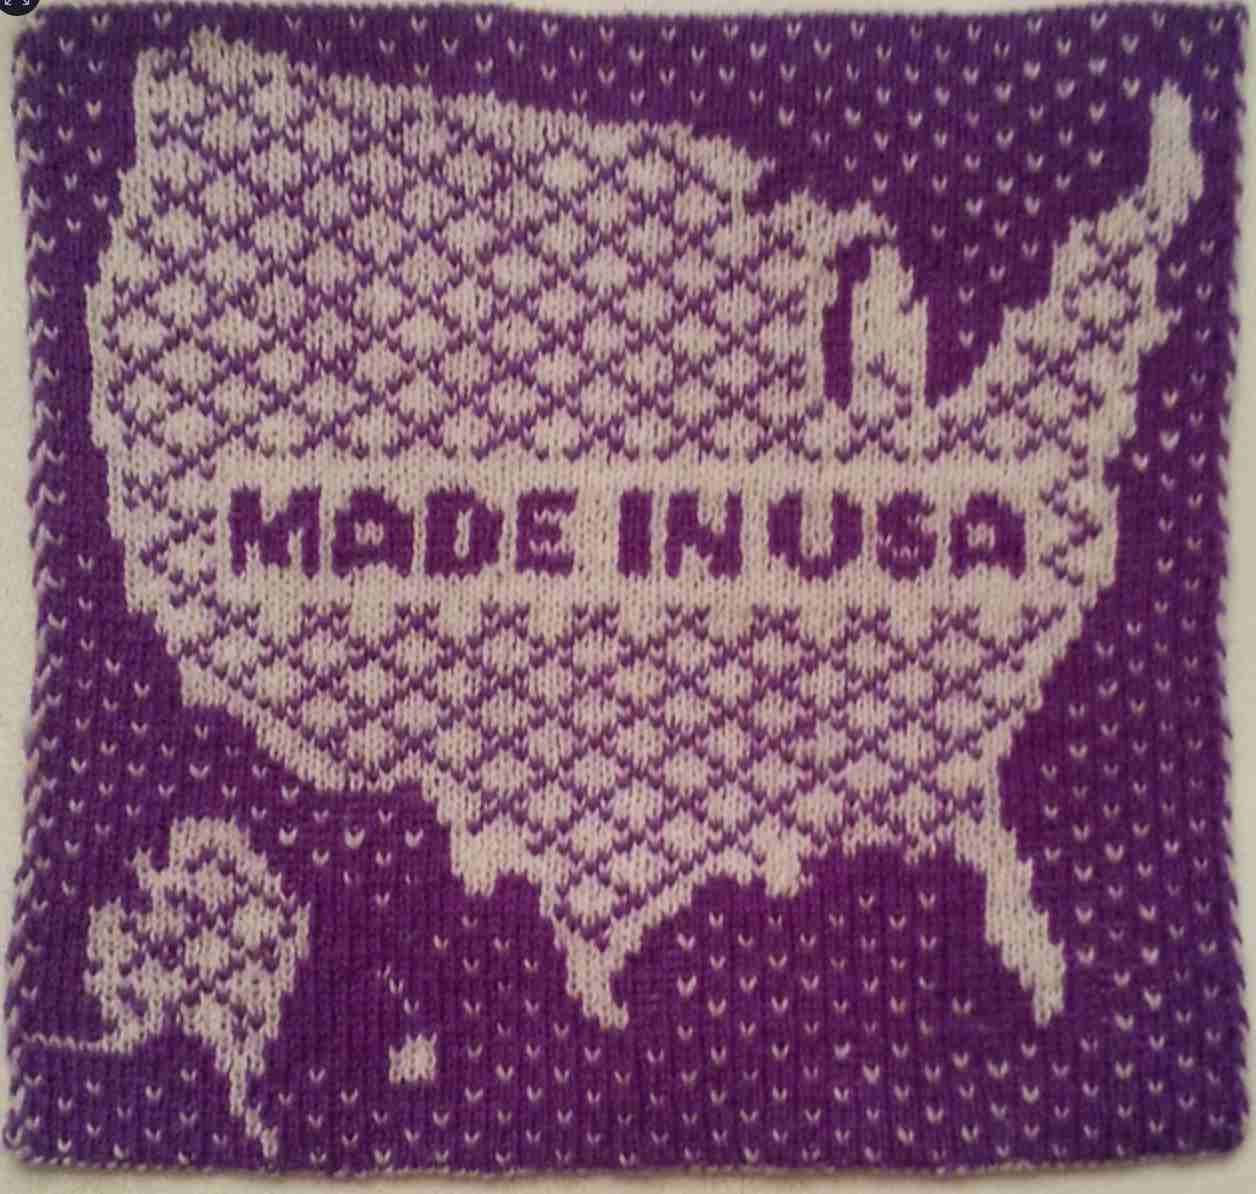 Made in USA Knitted Potholder- Free Knitting Pattern